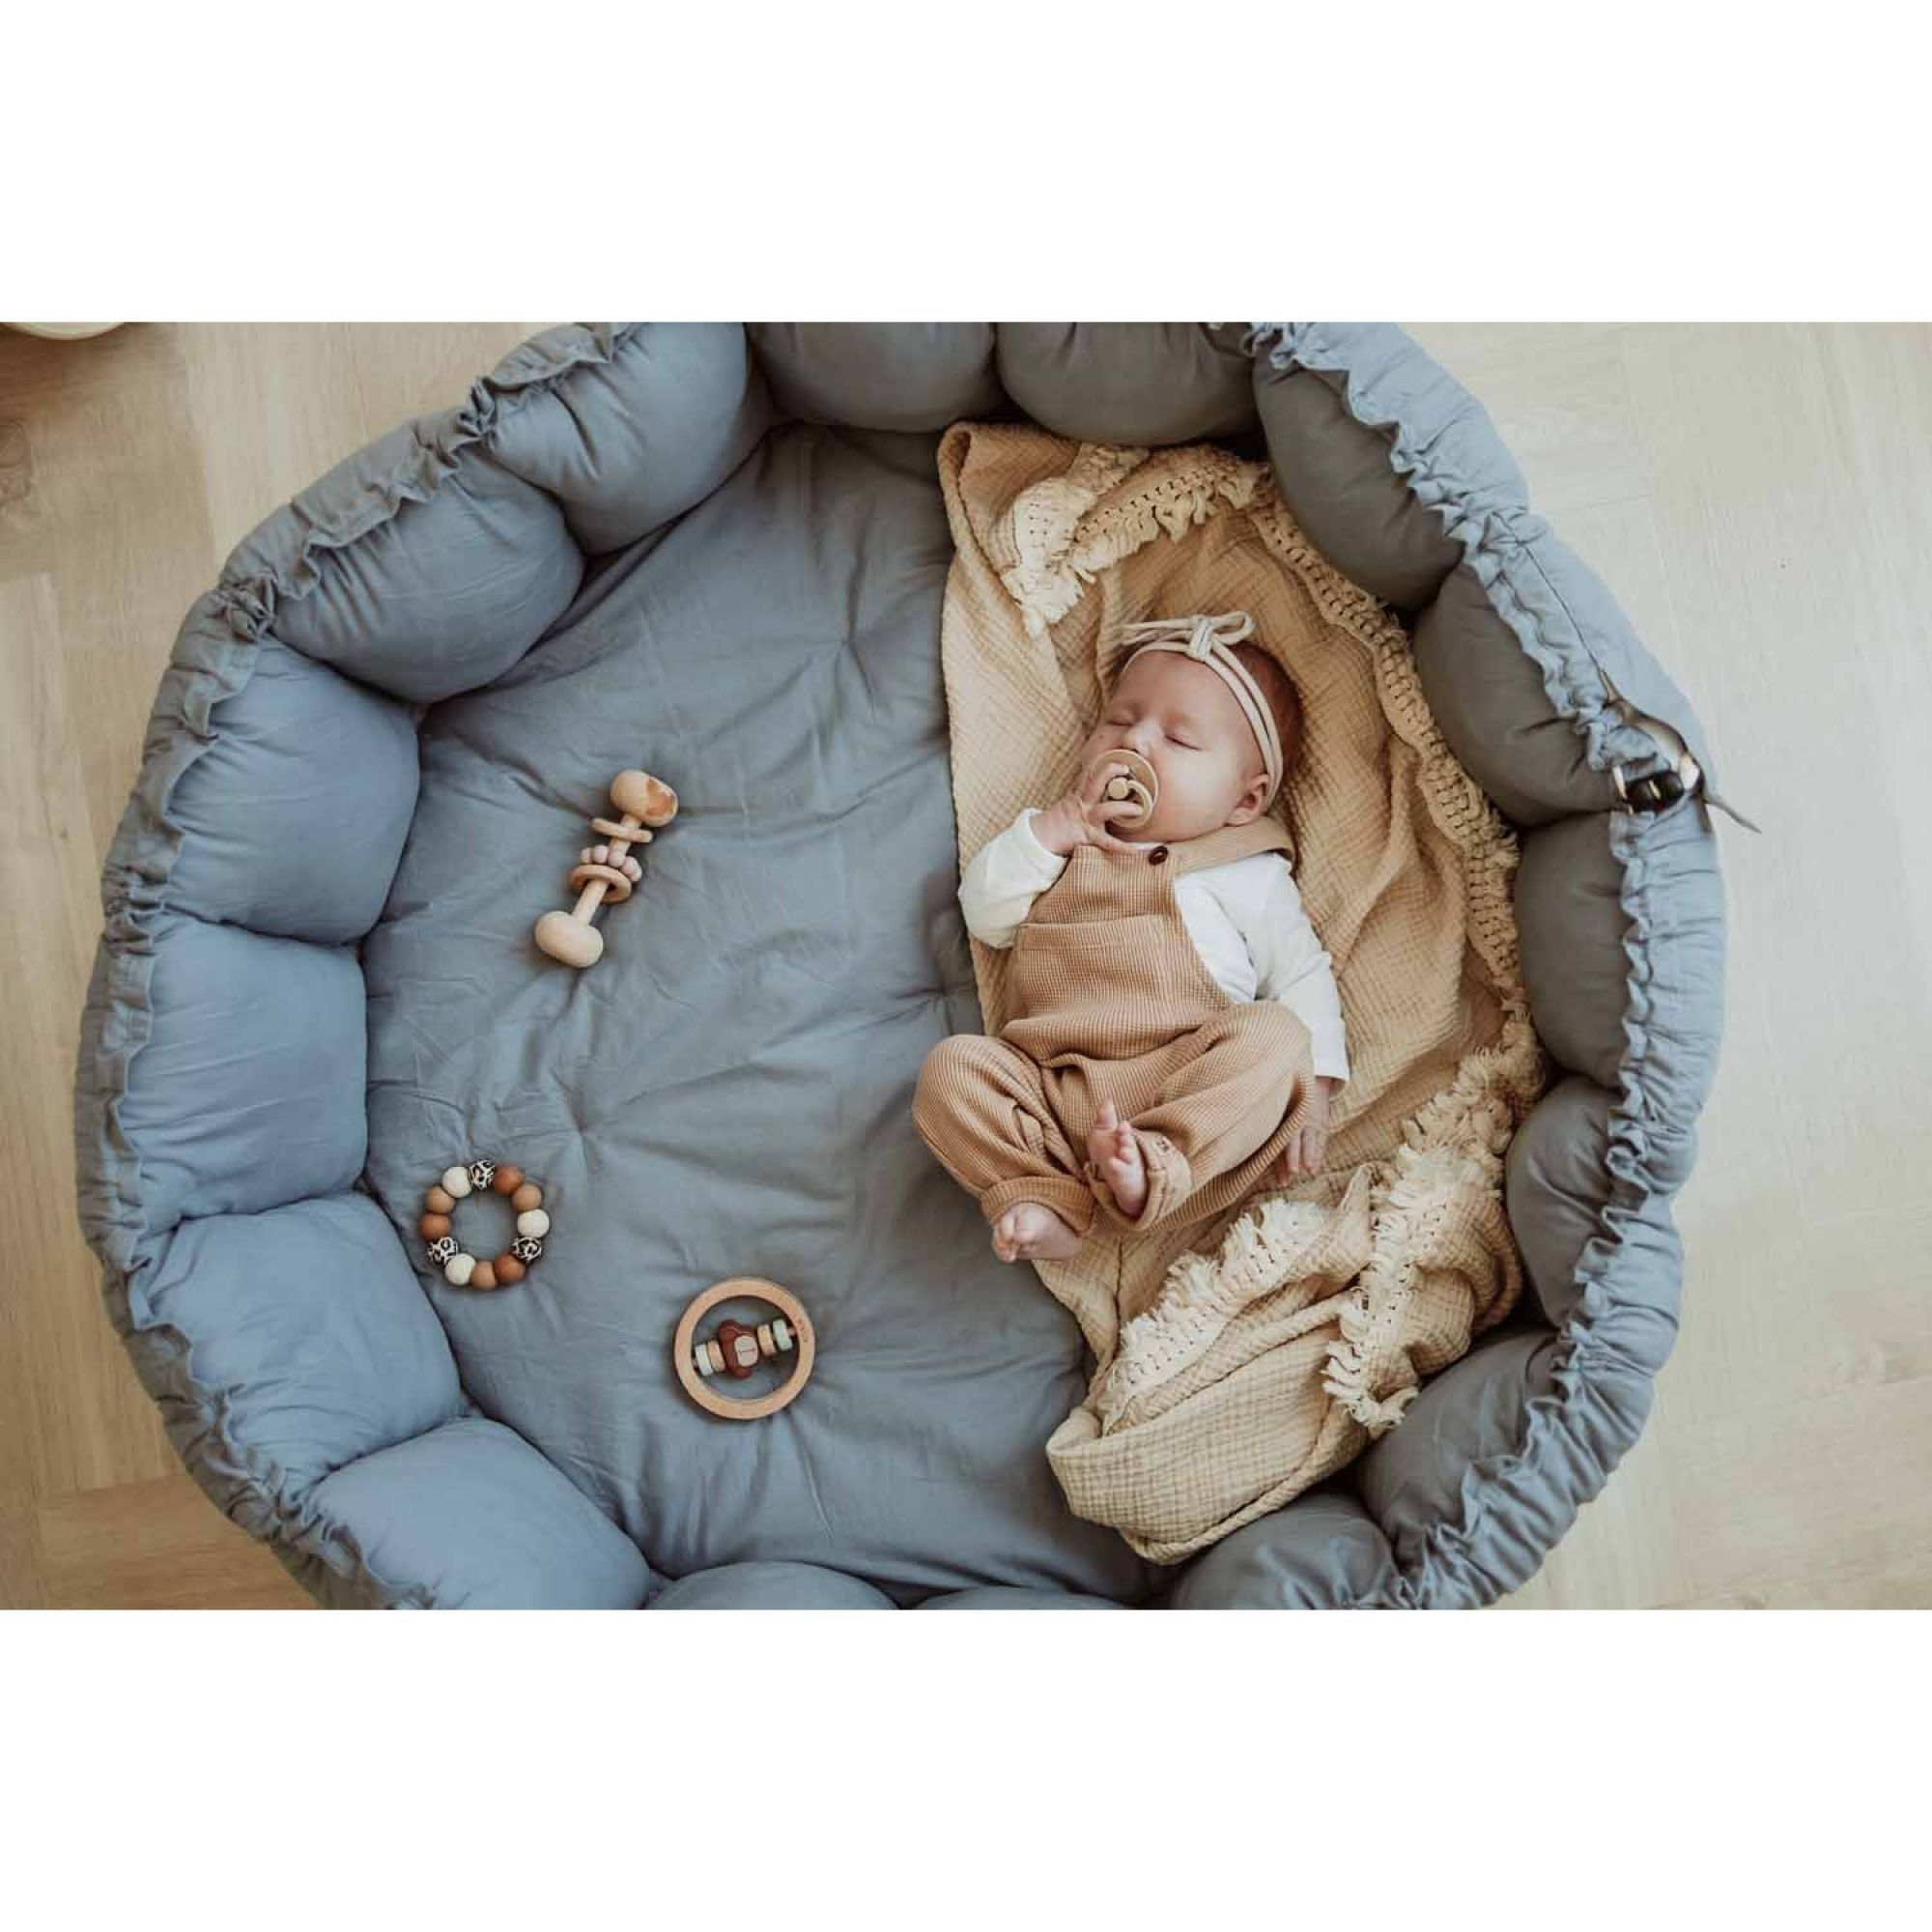 https://www.madeinbebe.com/boutique/uploads/articles/zoom/bloom-dusty-blue-organic-babymat-play-go_OF.jpg